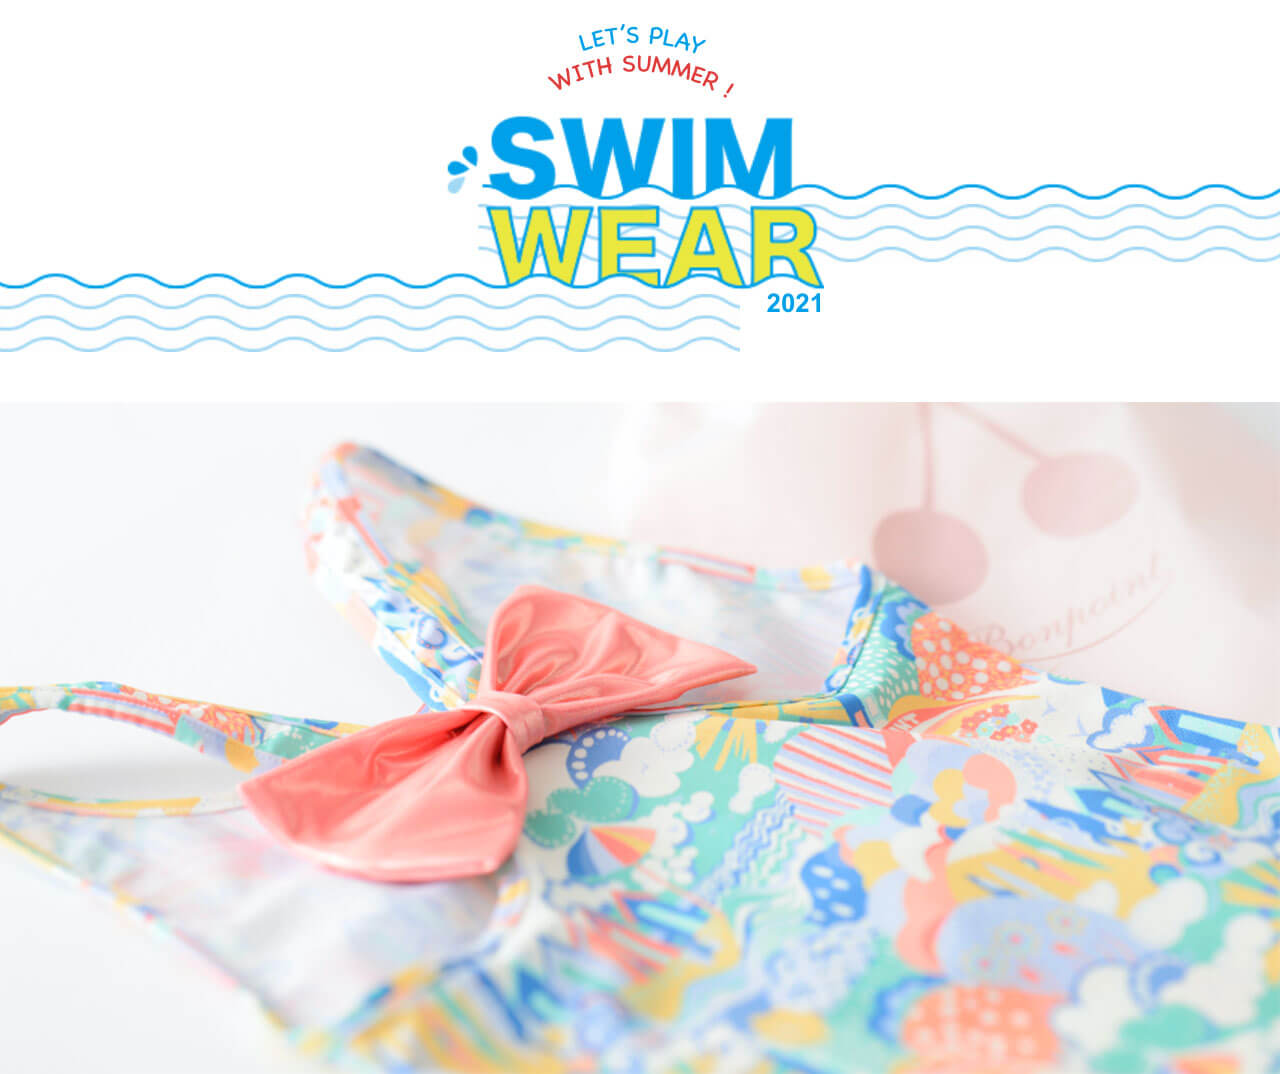 LET'S PLAY WITH SUMMER! SWIM WEAR 2021